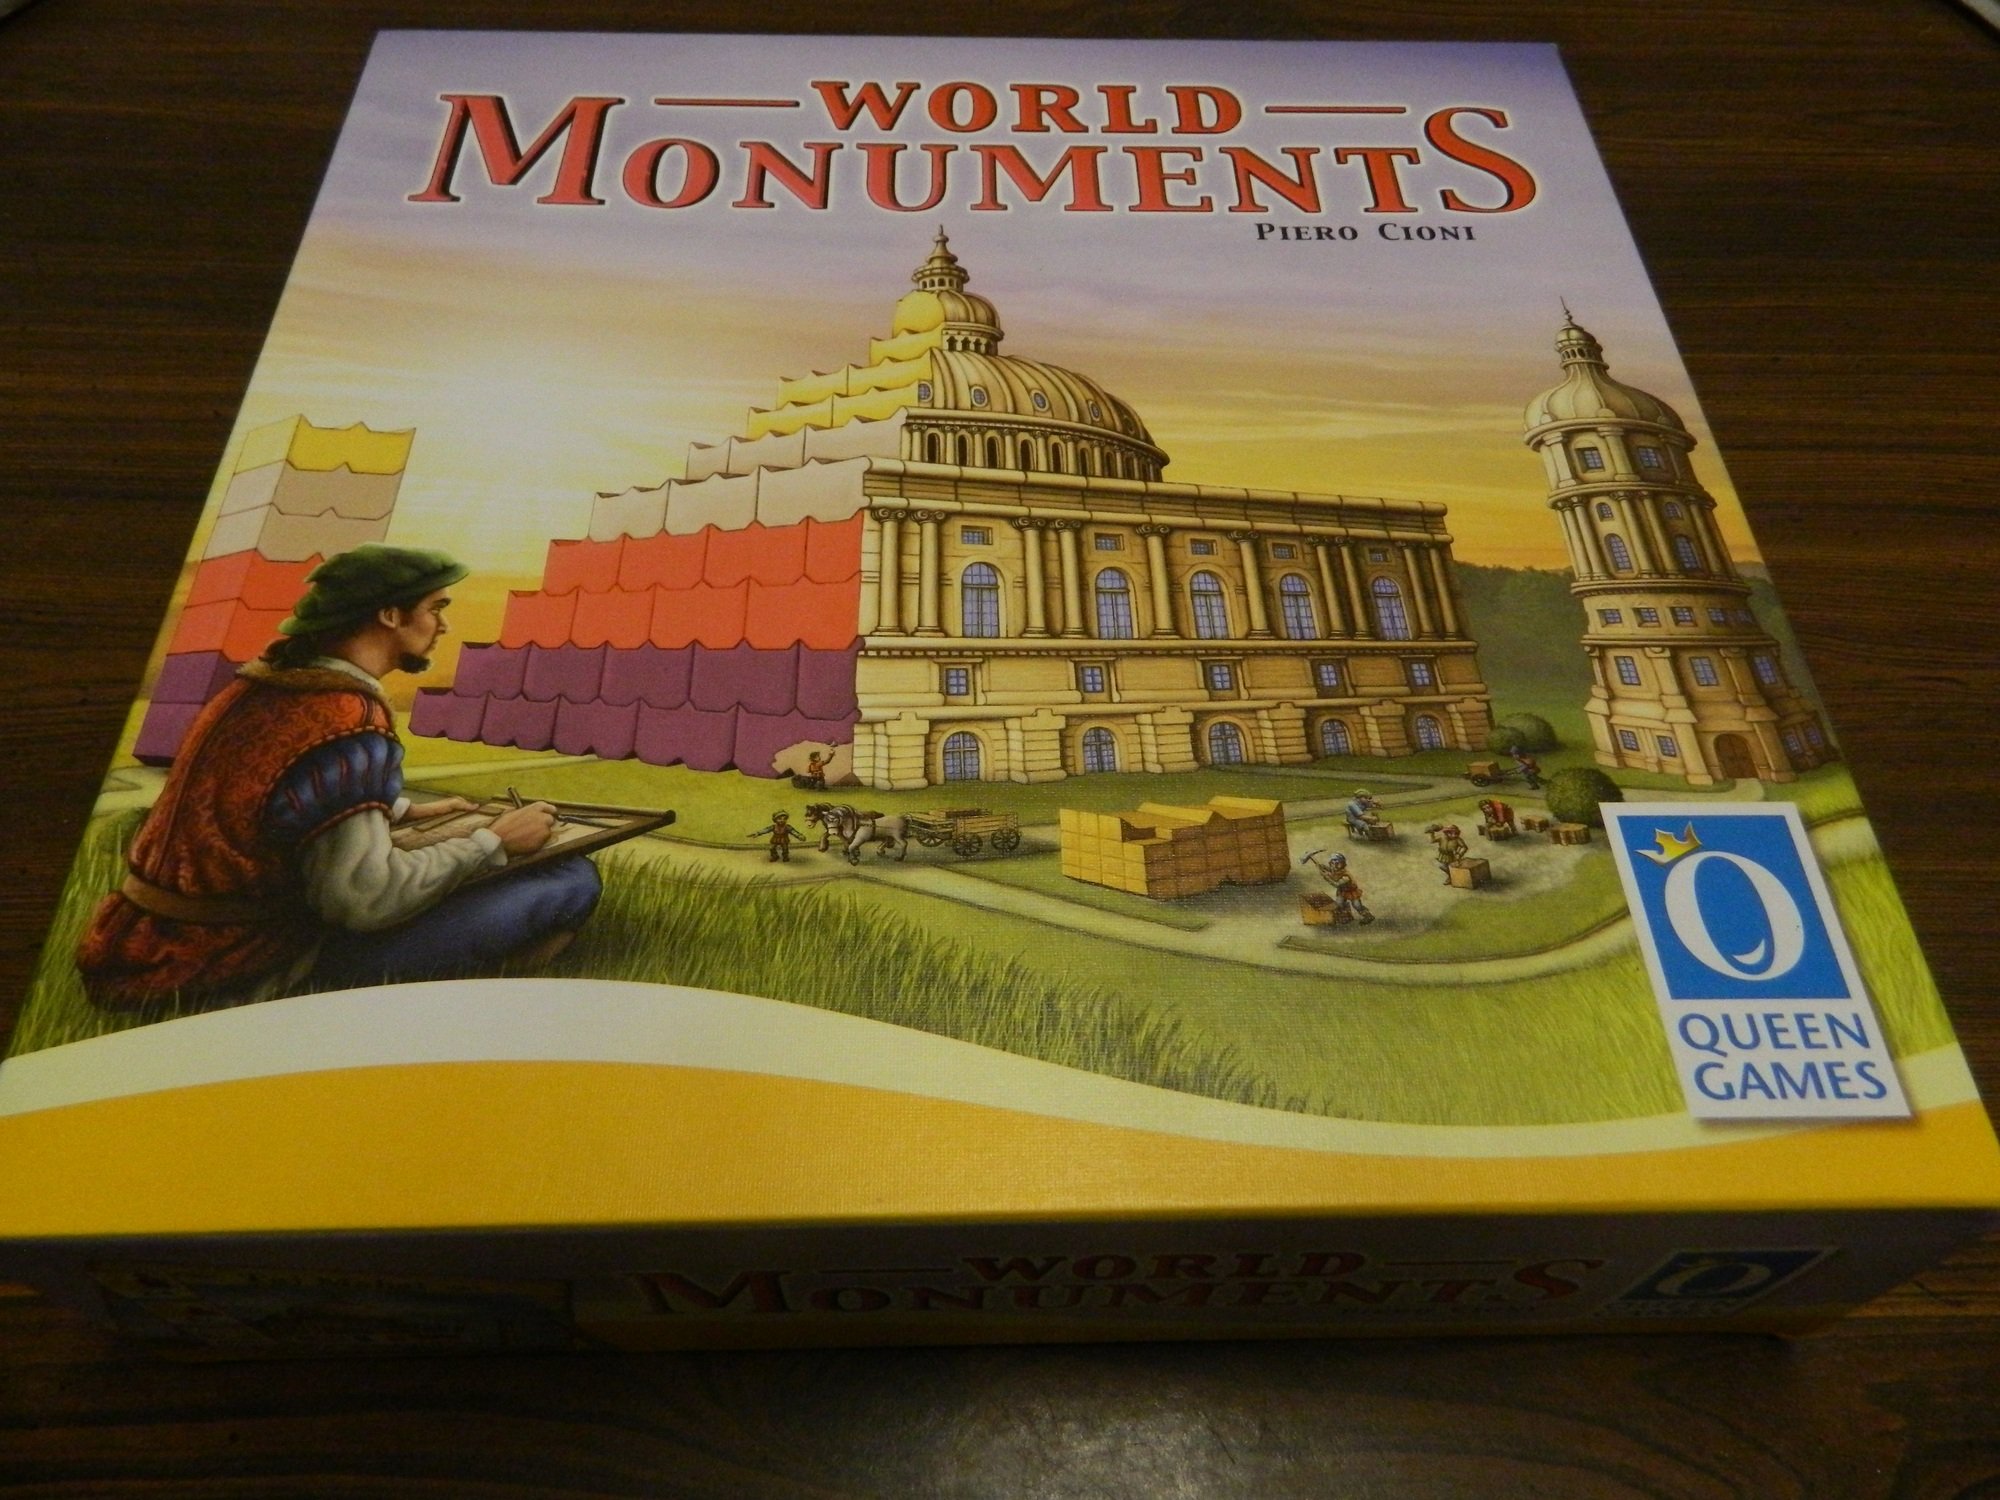 World Monuments Board Game Review and Rules